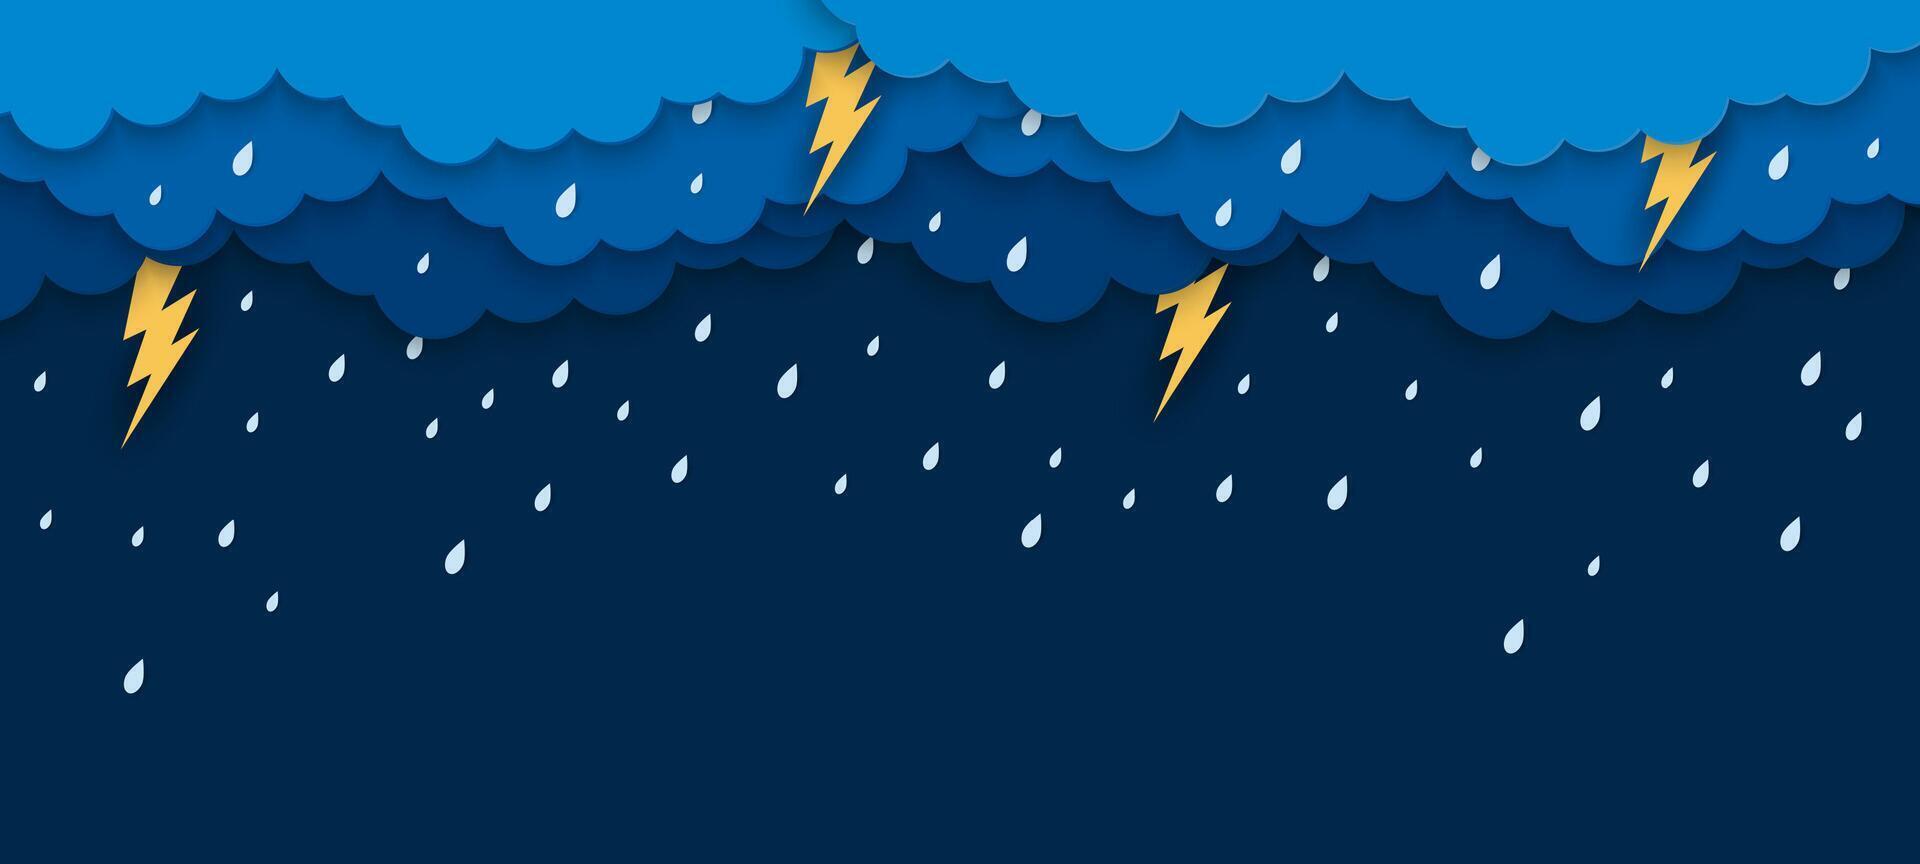 Paper cut rain clouds with lightnings and drops vector